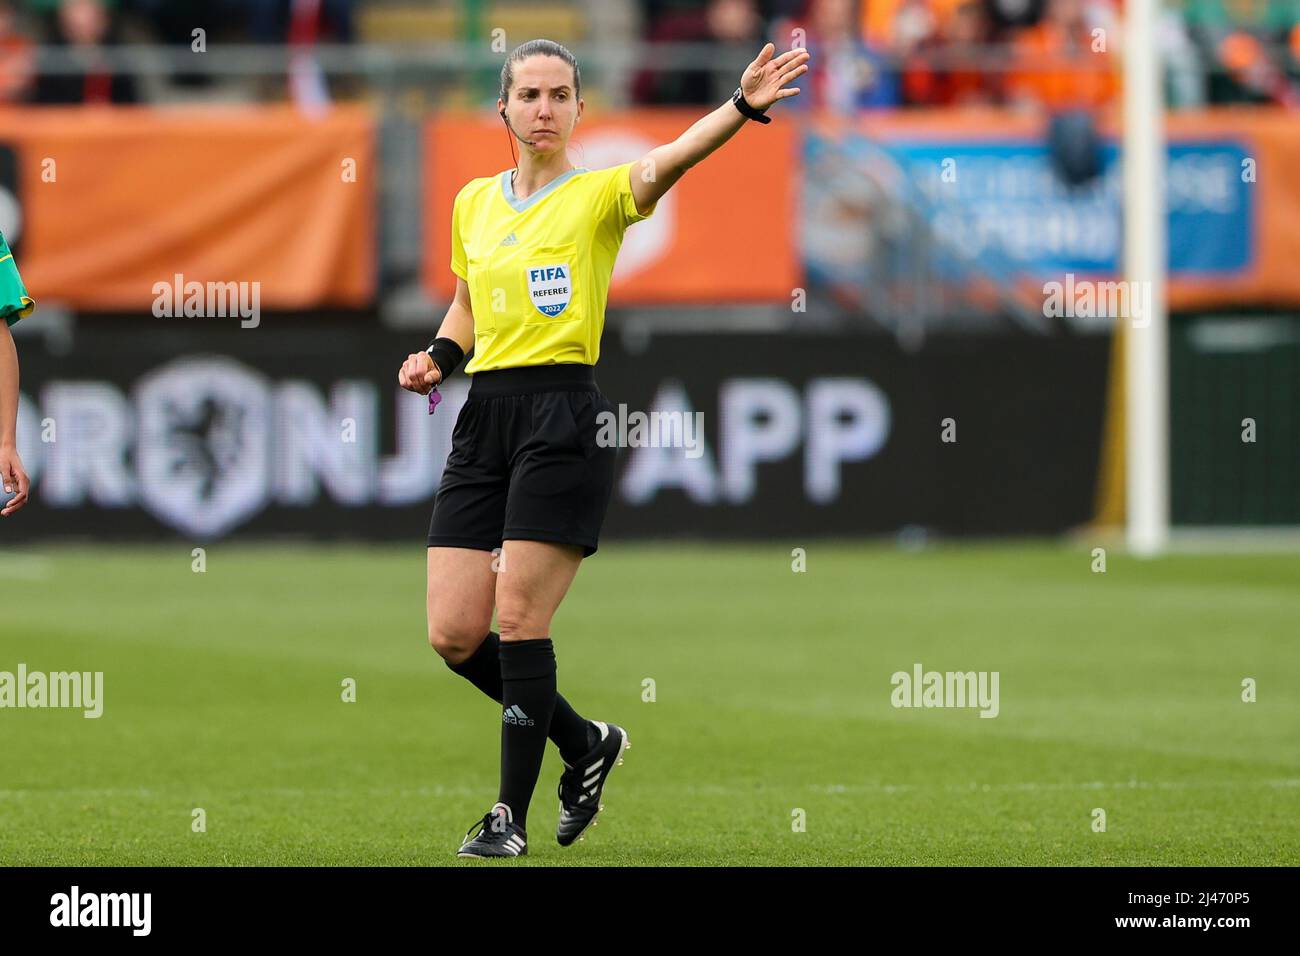 DEN HAAG, NETHERLANDS - APRIL 12: Referee Maria Dolores Martinez Madrona SPA during the Friendly match between The Netherlands Women and South Africa Women at Cars Jeans Stadion on April 12, 2022 in Den Haag, Netherlands (Photo by Hans van der Valk/Orange Pictures) Stock Photo